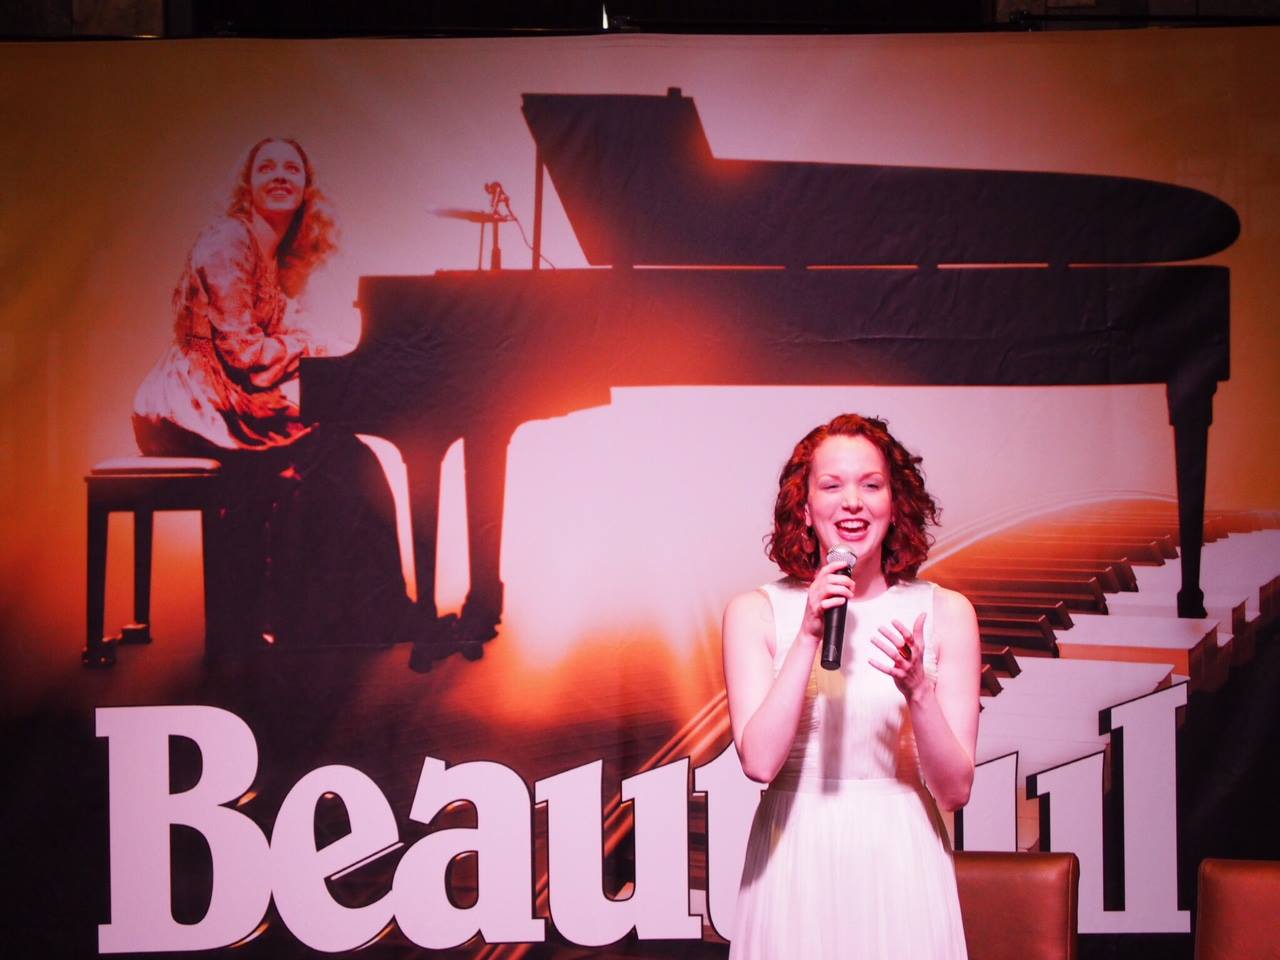 SHOWBIZ CHICAGO SPOTLIGHT! PREVIEW PARTY FOR BEAUTIFUL—THE CAROLE KING MUSICAL 1 BEAUTIFUL—THE CAROLE KING MUSICAL, about the early life and career of the legendary and groundbreaking singer/songwriter, which included a stunning performing by Rebecca LaChance performing as “Carole King” with remarks by Producer Paul Blake, Playwright Douglas McGrath and Director Marc Bruni